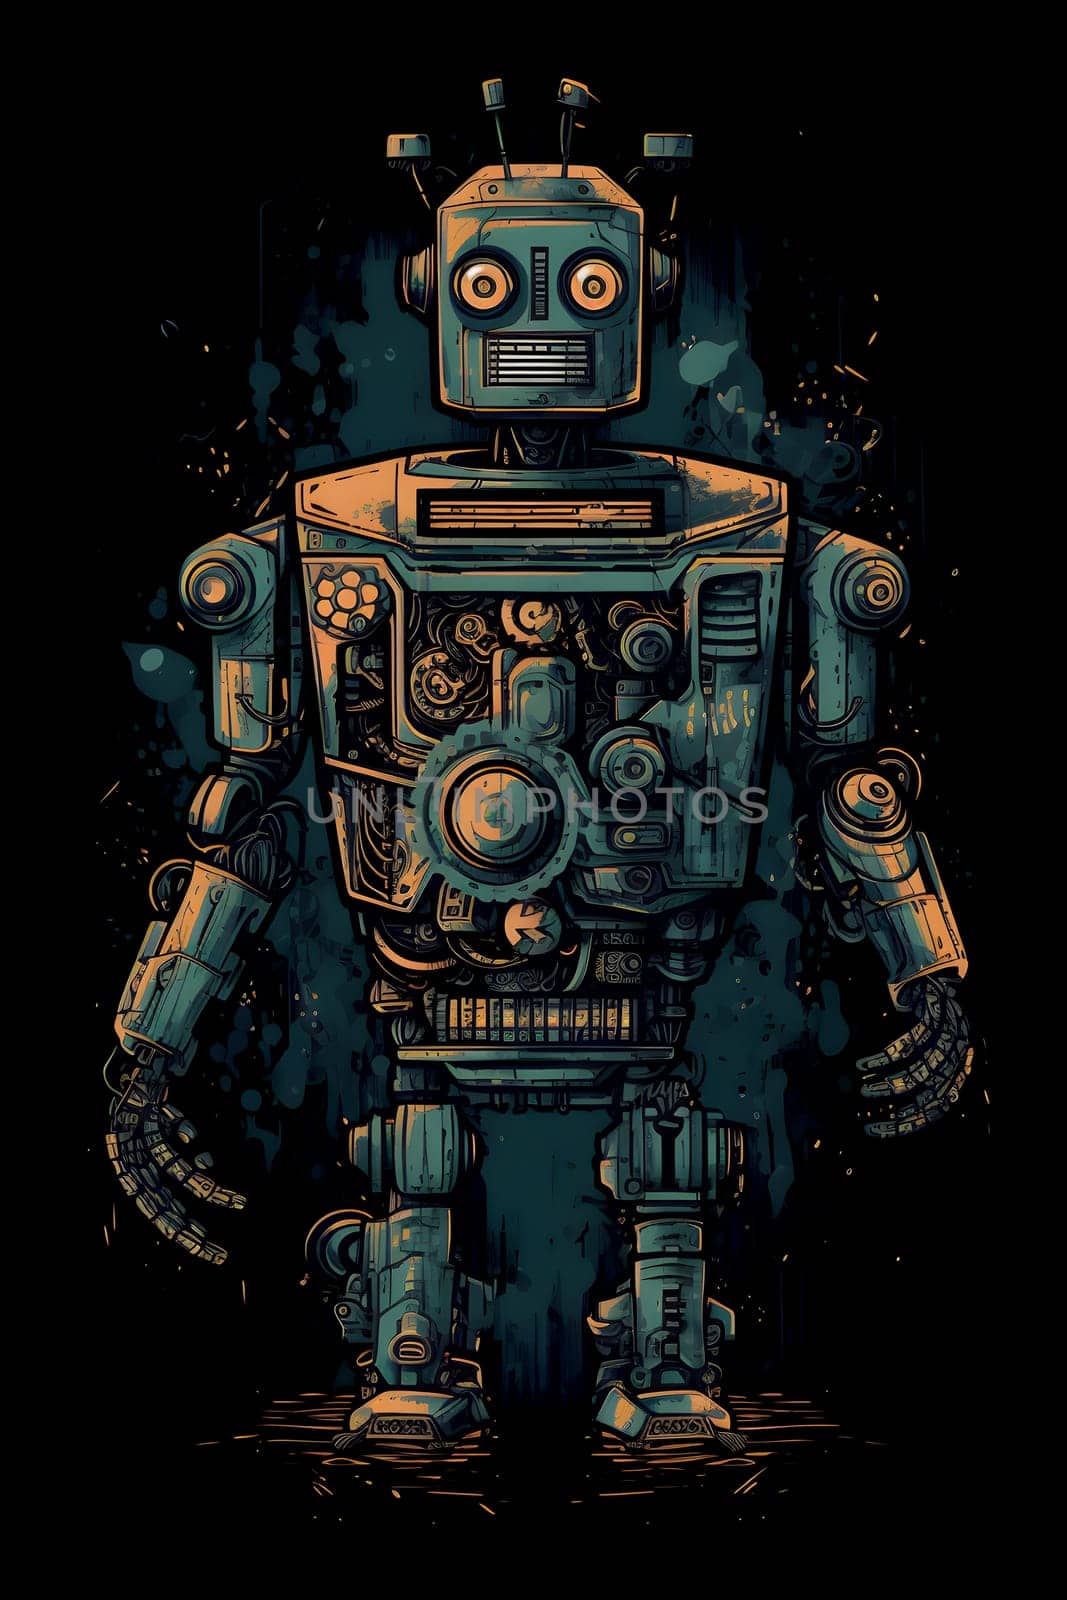 cool robot on black background for t-shirt design. Neural network generated in May 2023. Not based on any actual person, scene or pattern.